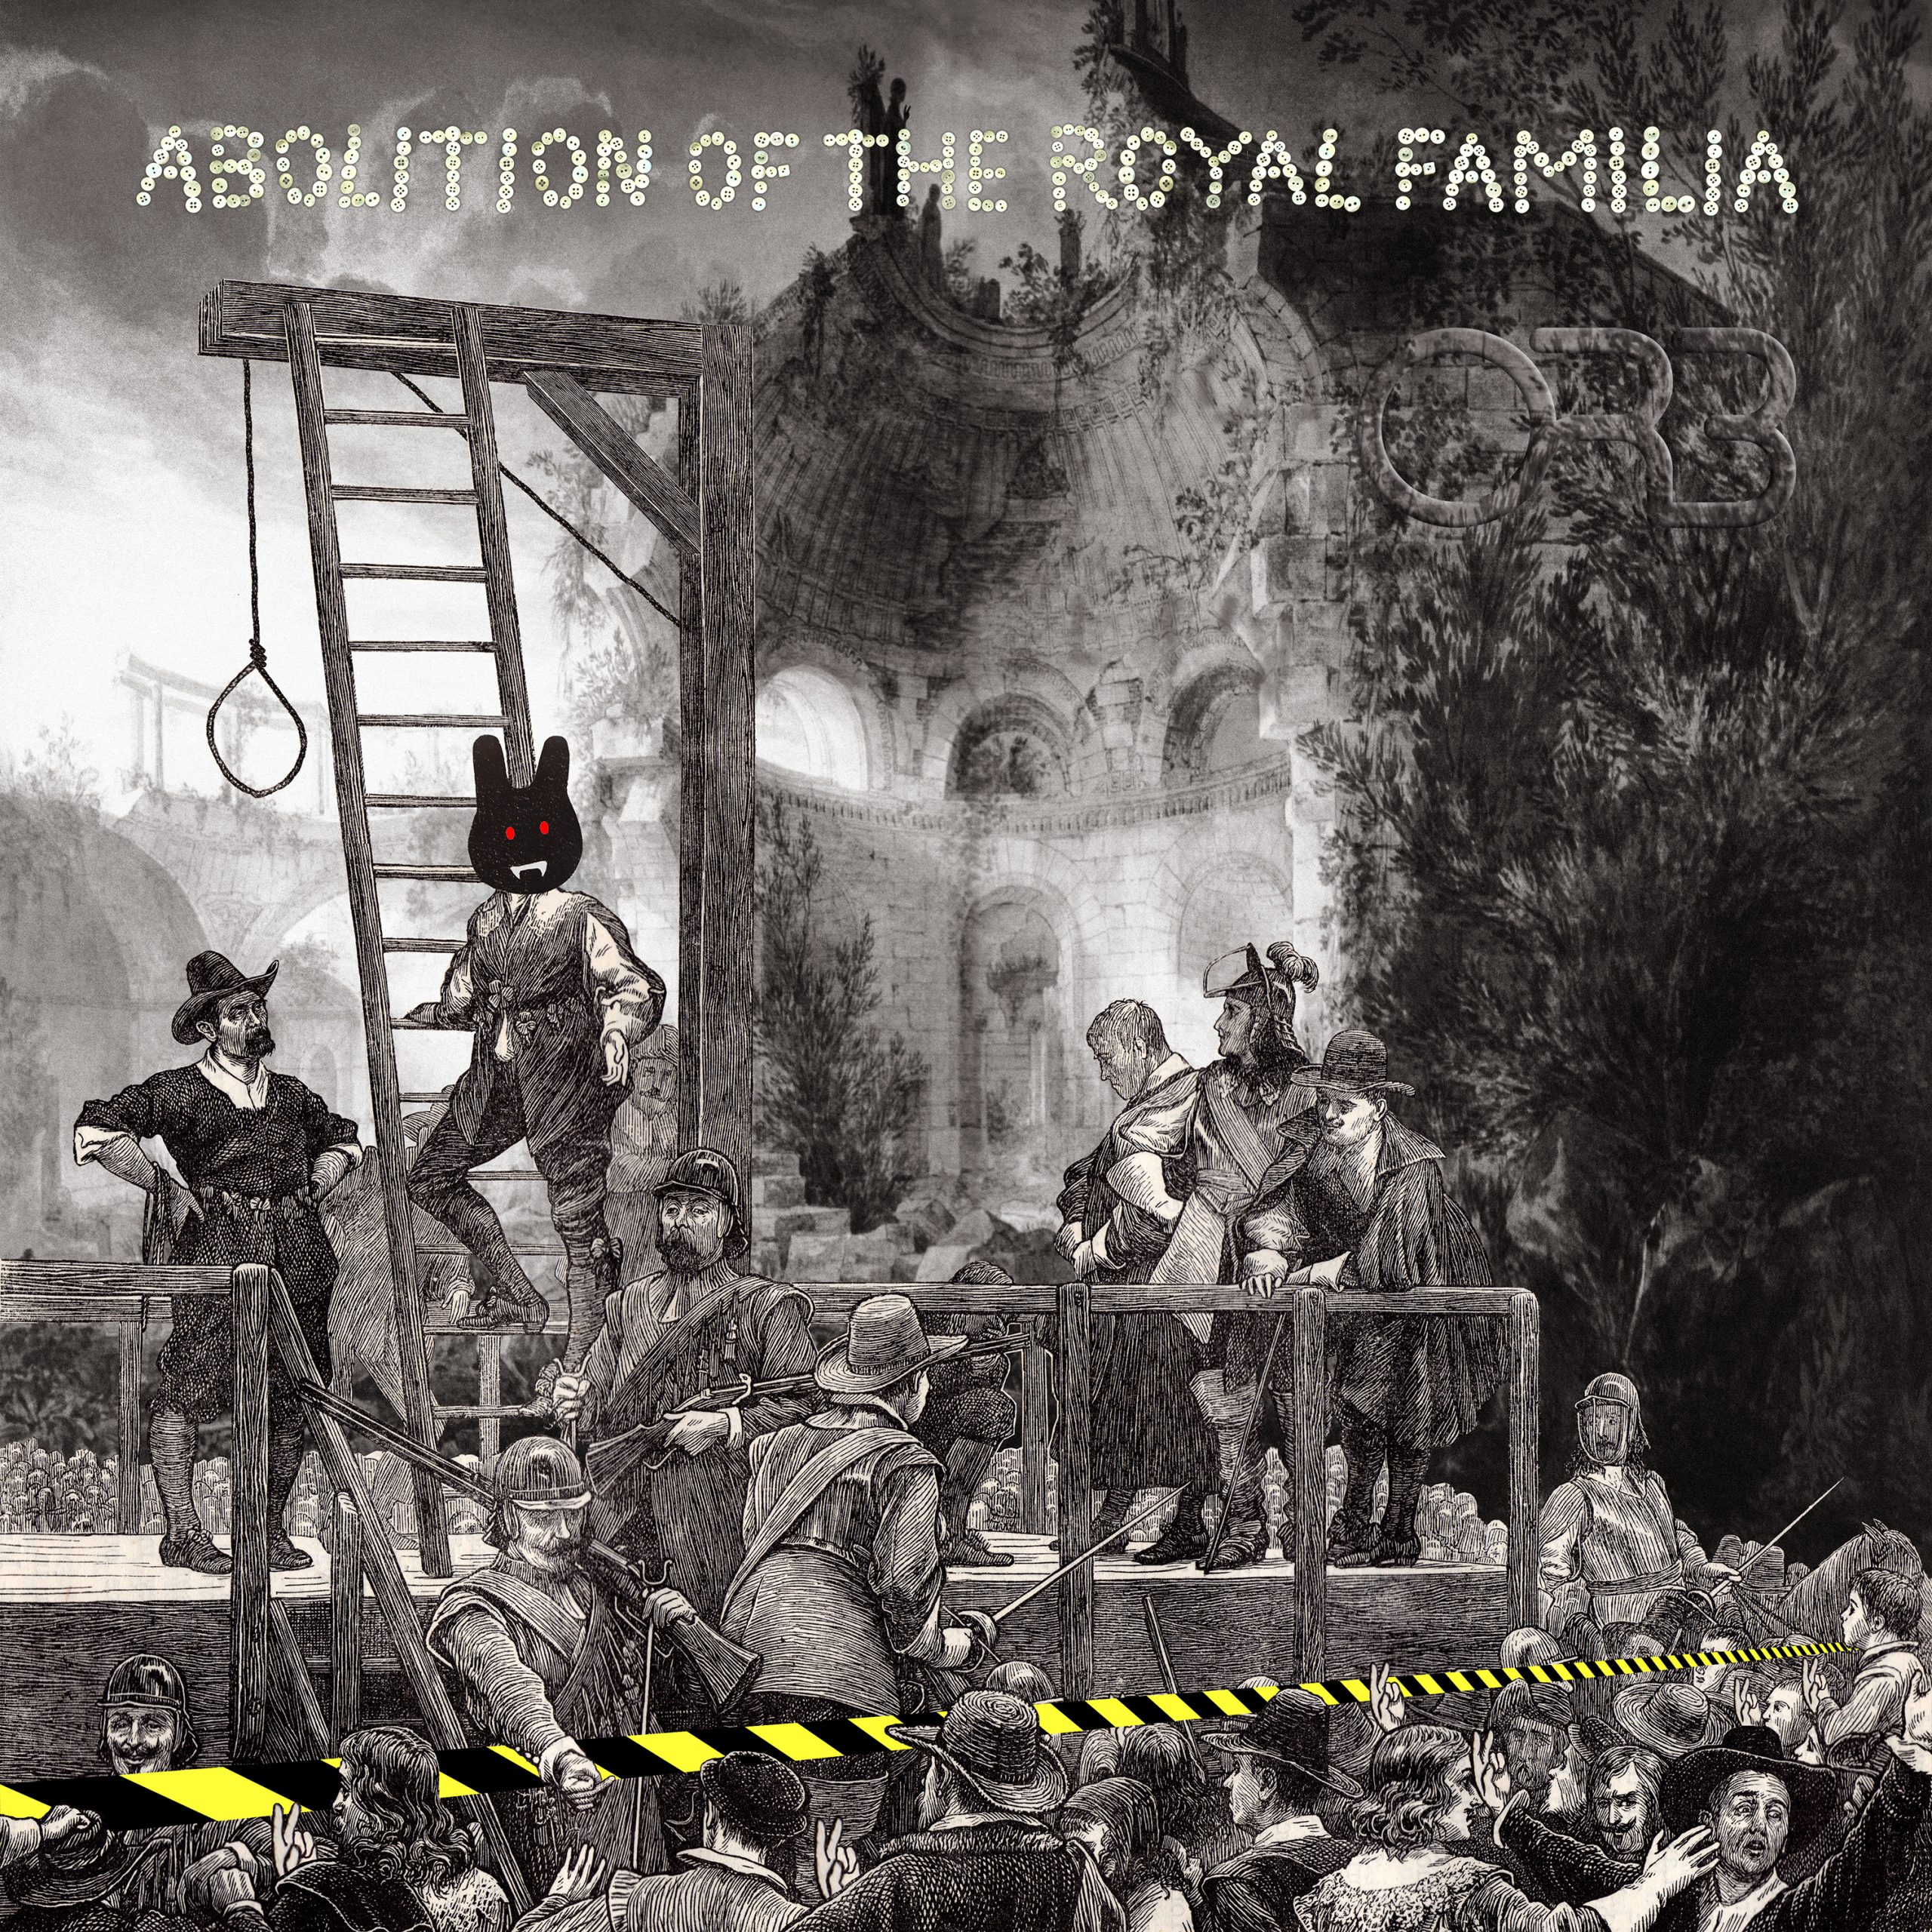 ALBUM REVIEW: The Orb - Abolition Of The Royal Familia 